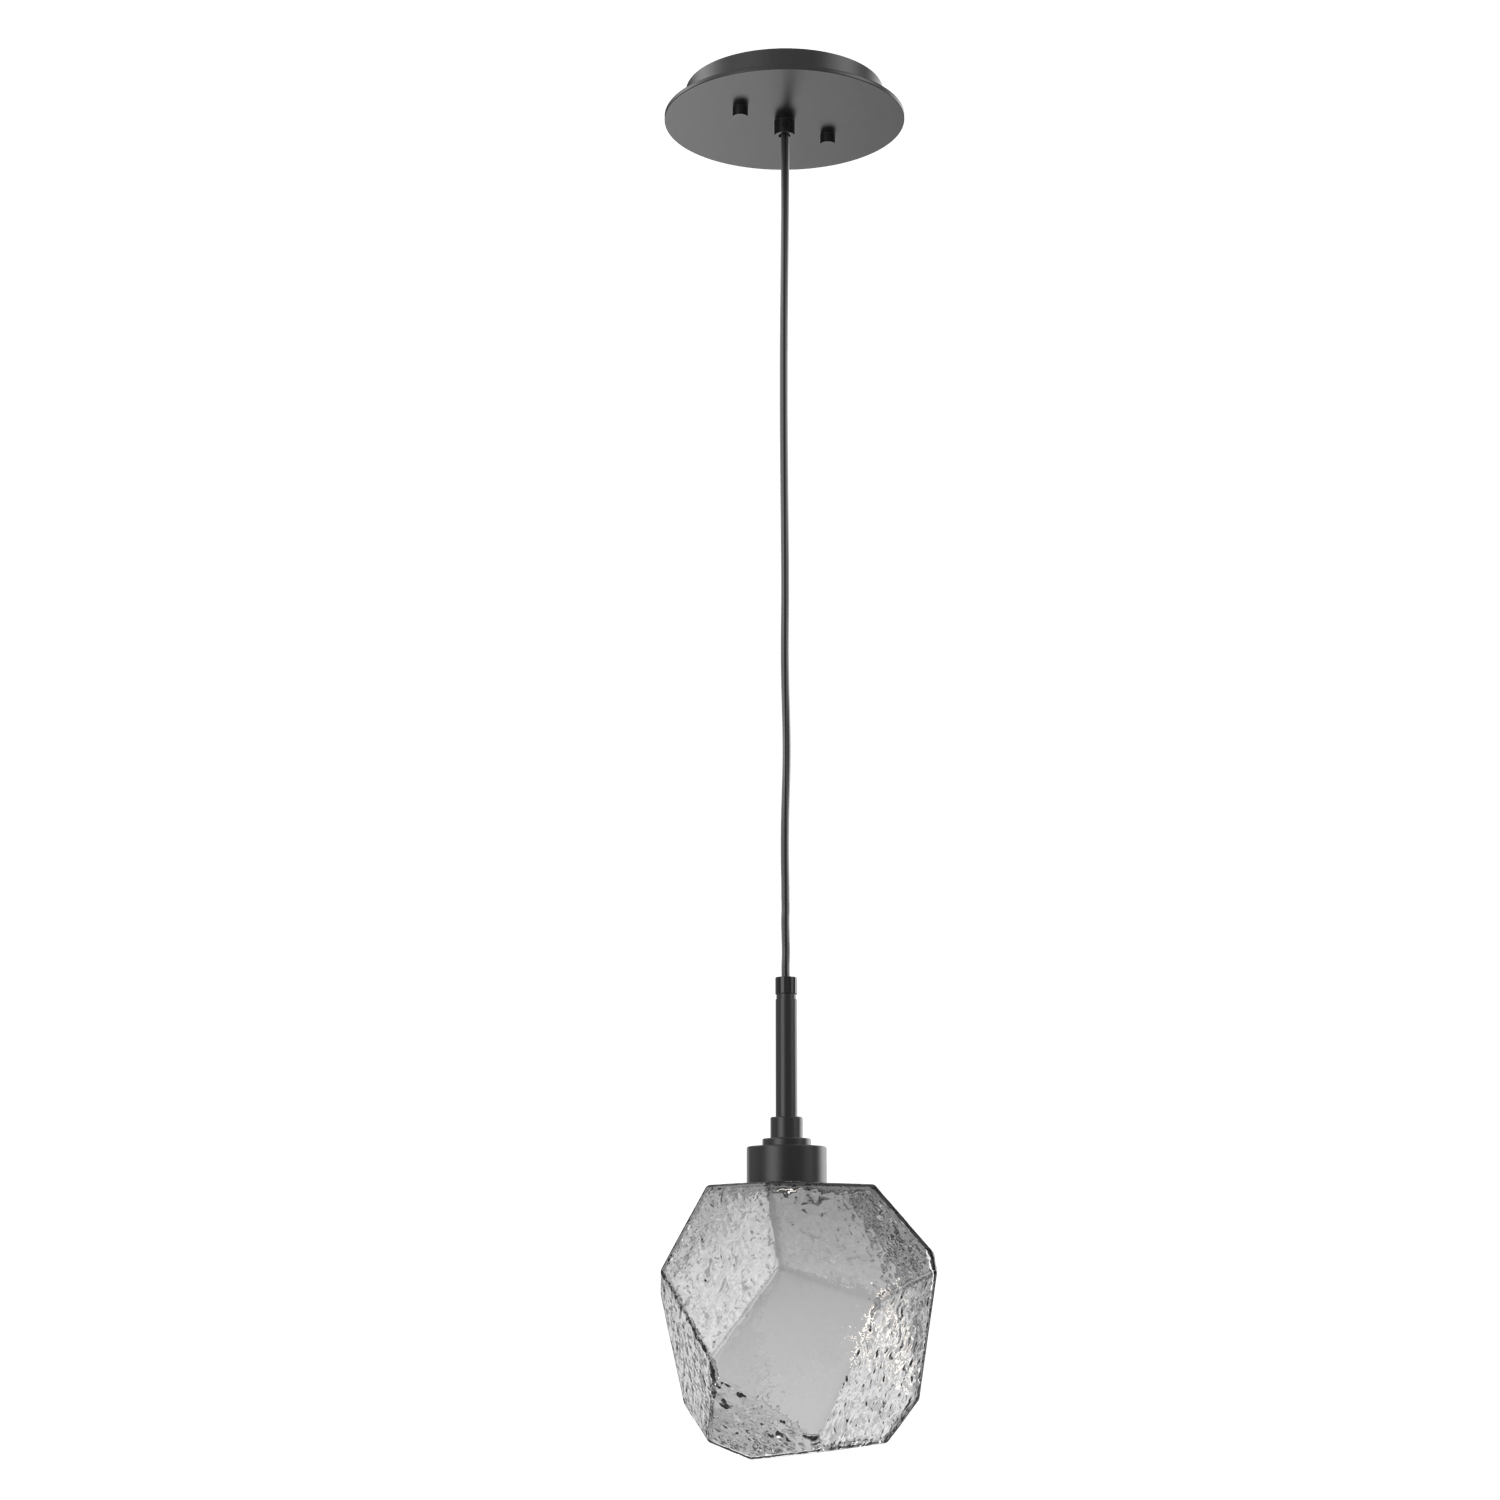 LAB0039-01-MB-S-Hammerton-Studio-Gem-pendant-light-with-matte-black-finish-and-smoke-blown-glass-shades-and-LED-lamping